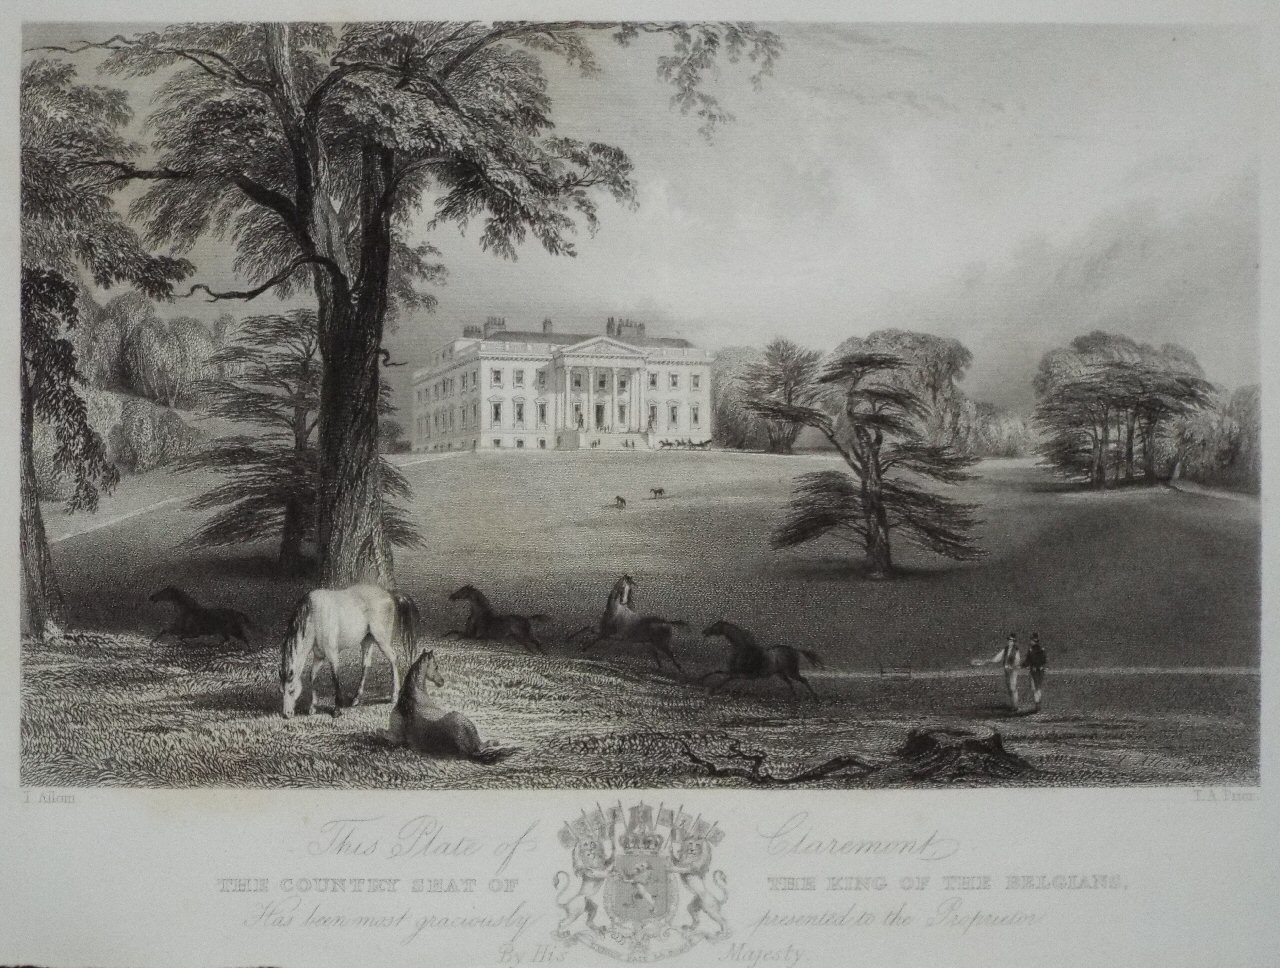 Print - This Plate of Claremont, the Country Seat of the King of the Belgians, Has been most graciously presented to the Proprietor by His Majesty. - Prior